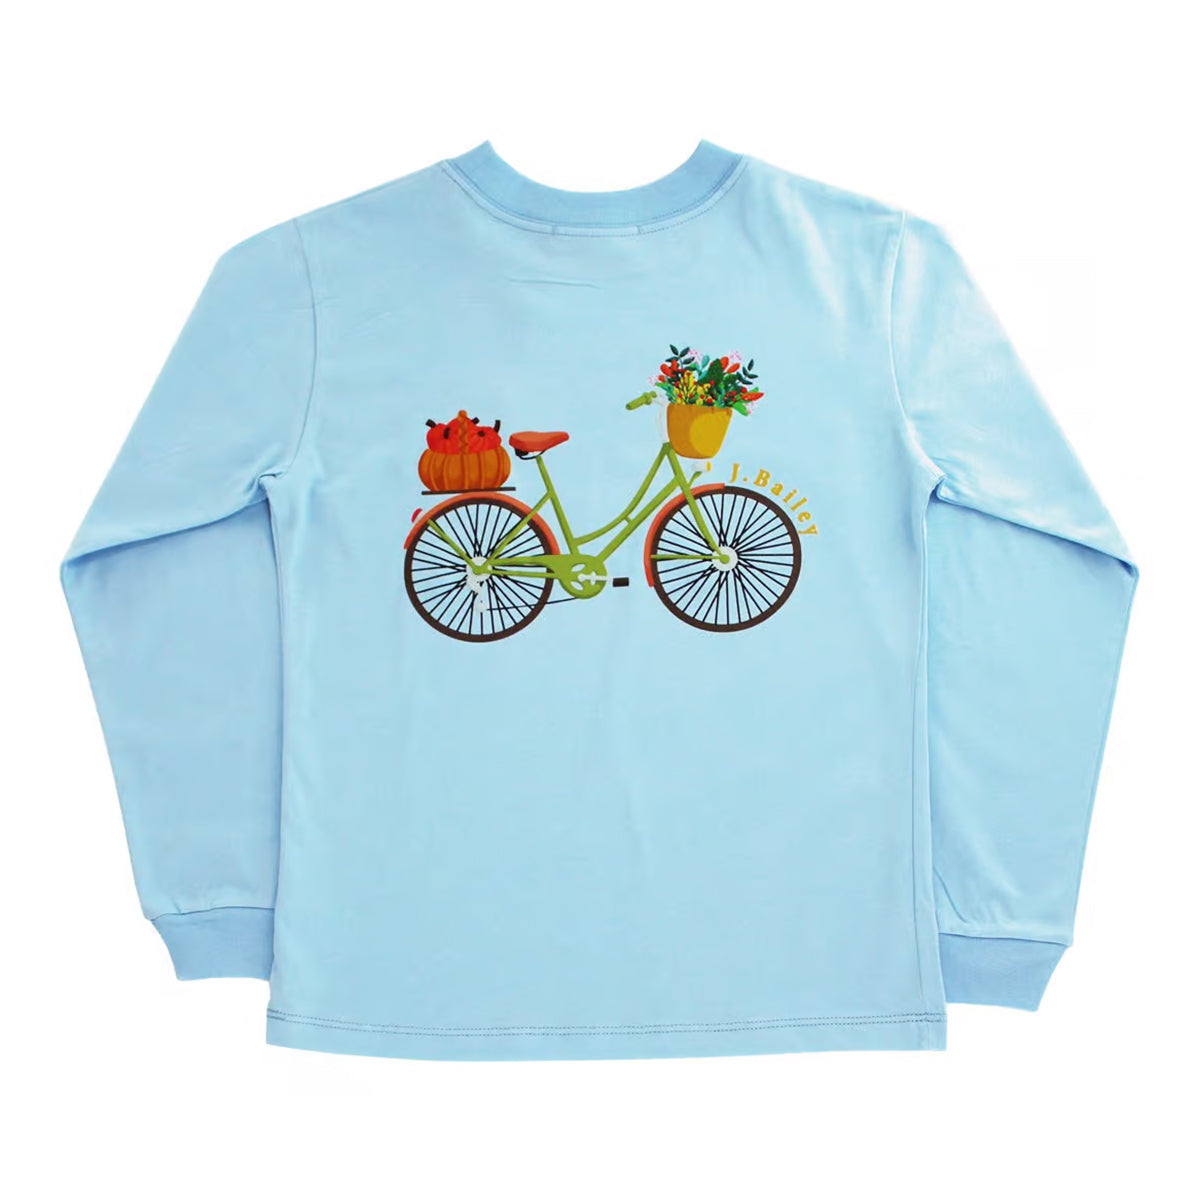 Toddler Girl's Fall Bicycle on Light Blue Logo T-Shirt by J. Bailey